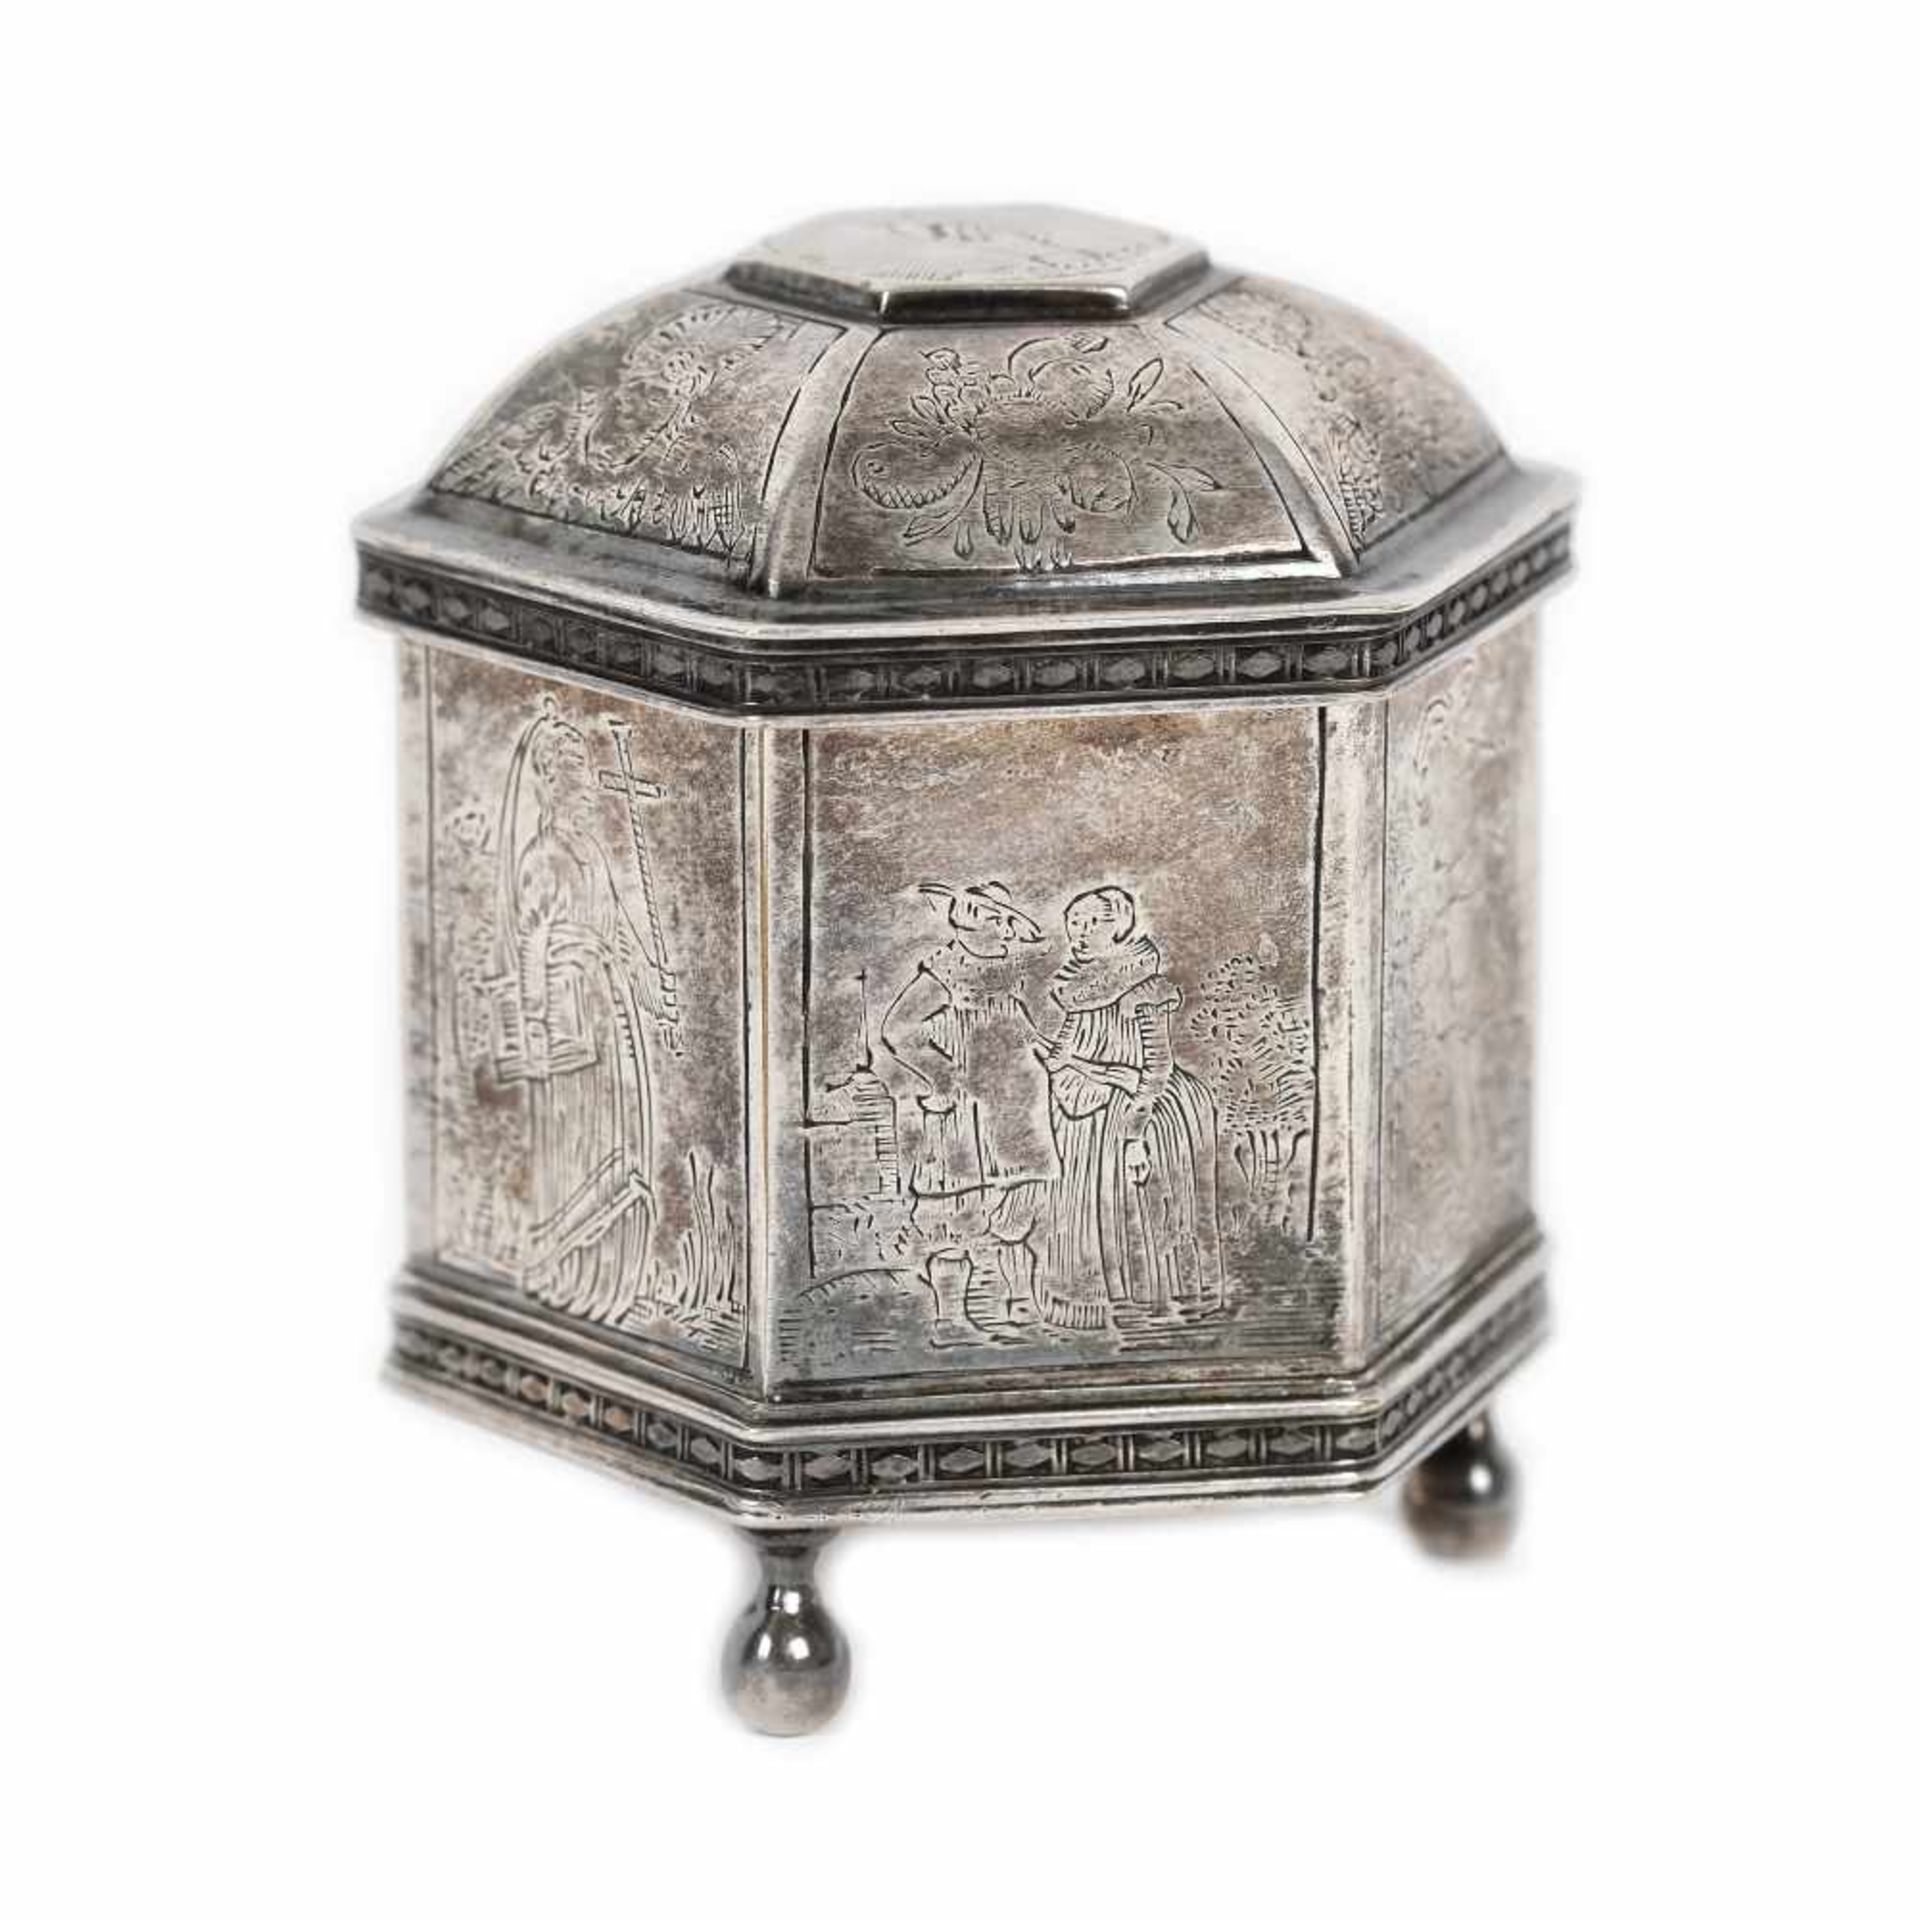 Partially gilded silver box, decorated with Masonic insignia, Great Britain, early 20th century